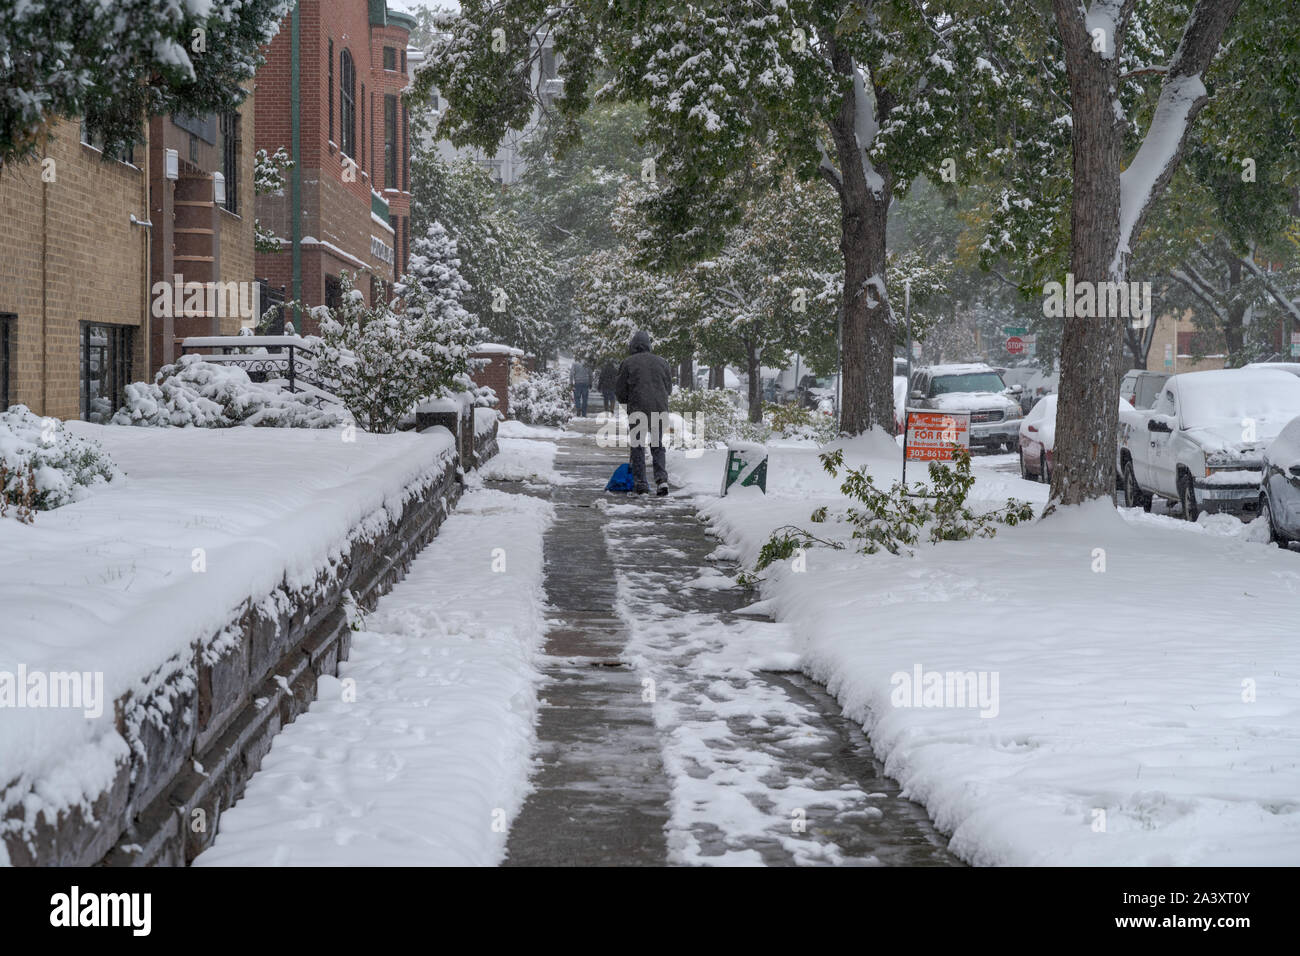 Denver, Colorado, USA- October 10, 2019: Man cleans side walk at Capitol Hill neighborhood during Denver's first snow storm of the season. Stock Photo